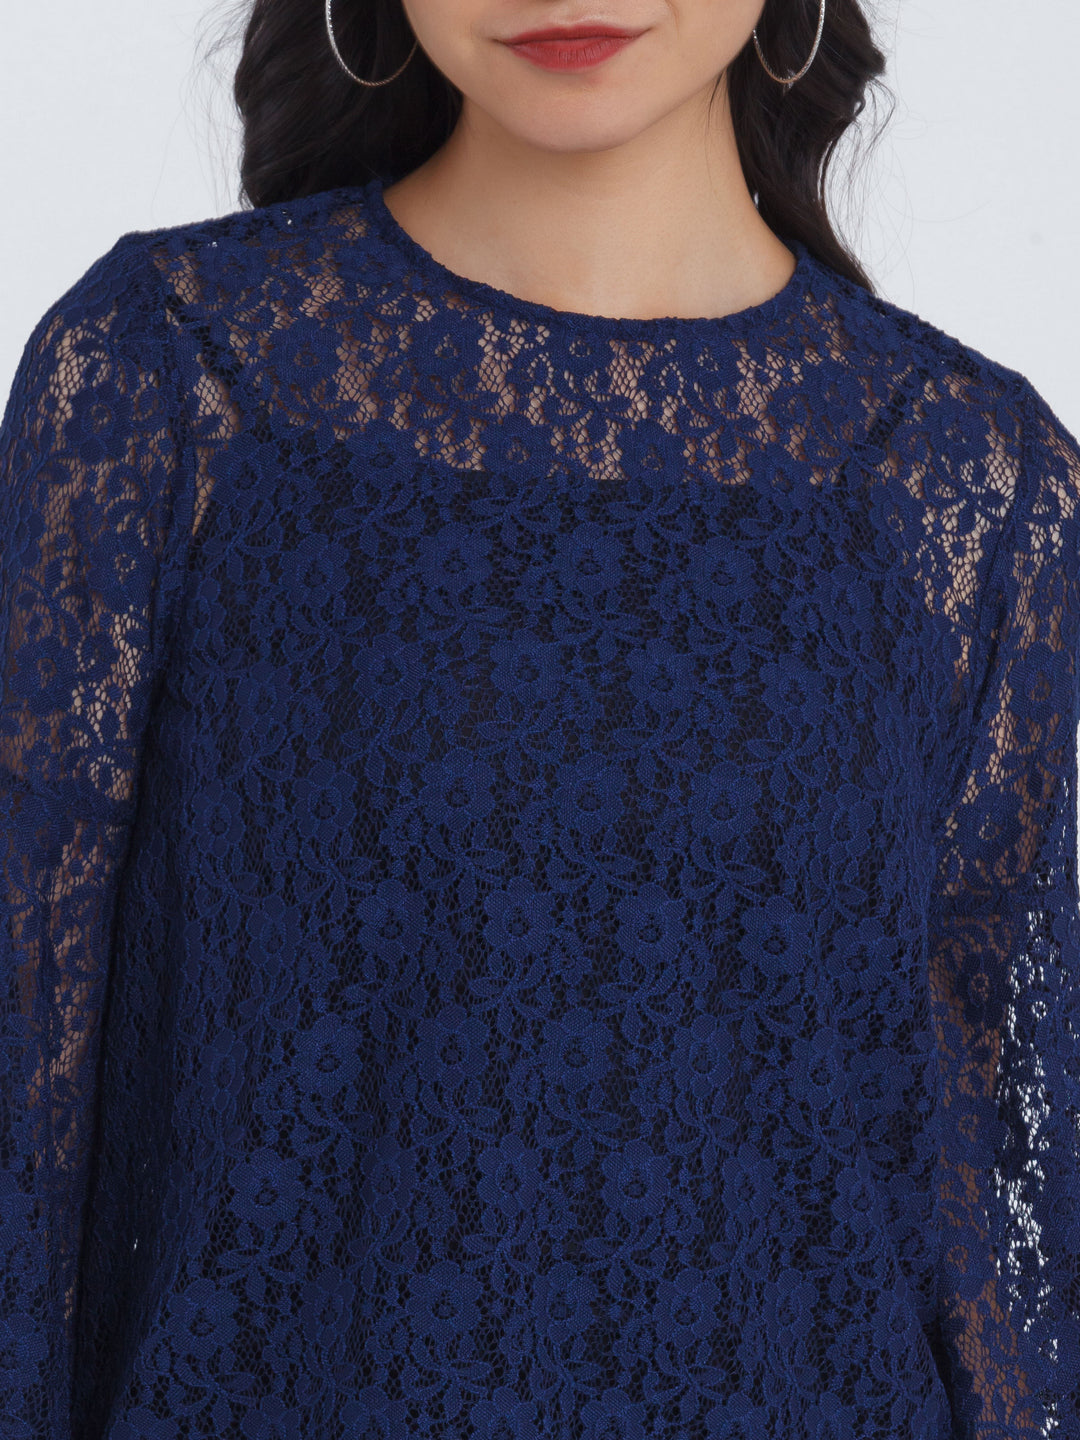 Navy Blue Lace Flared Sleeve Top For Women